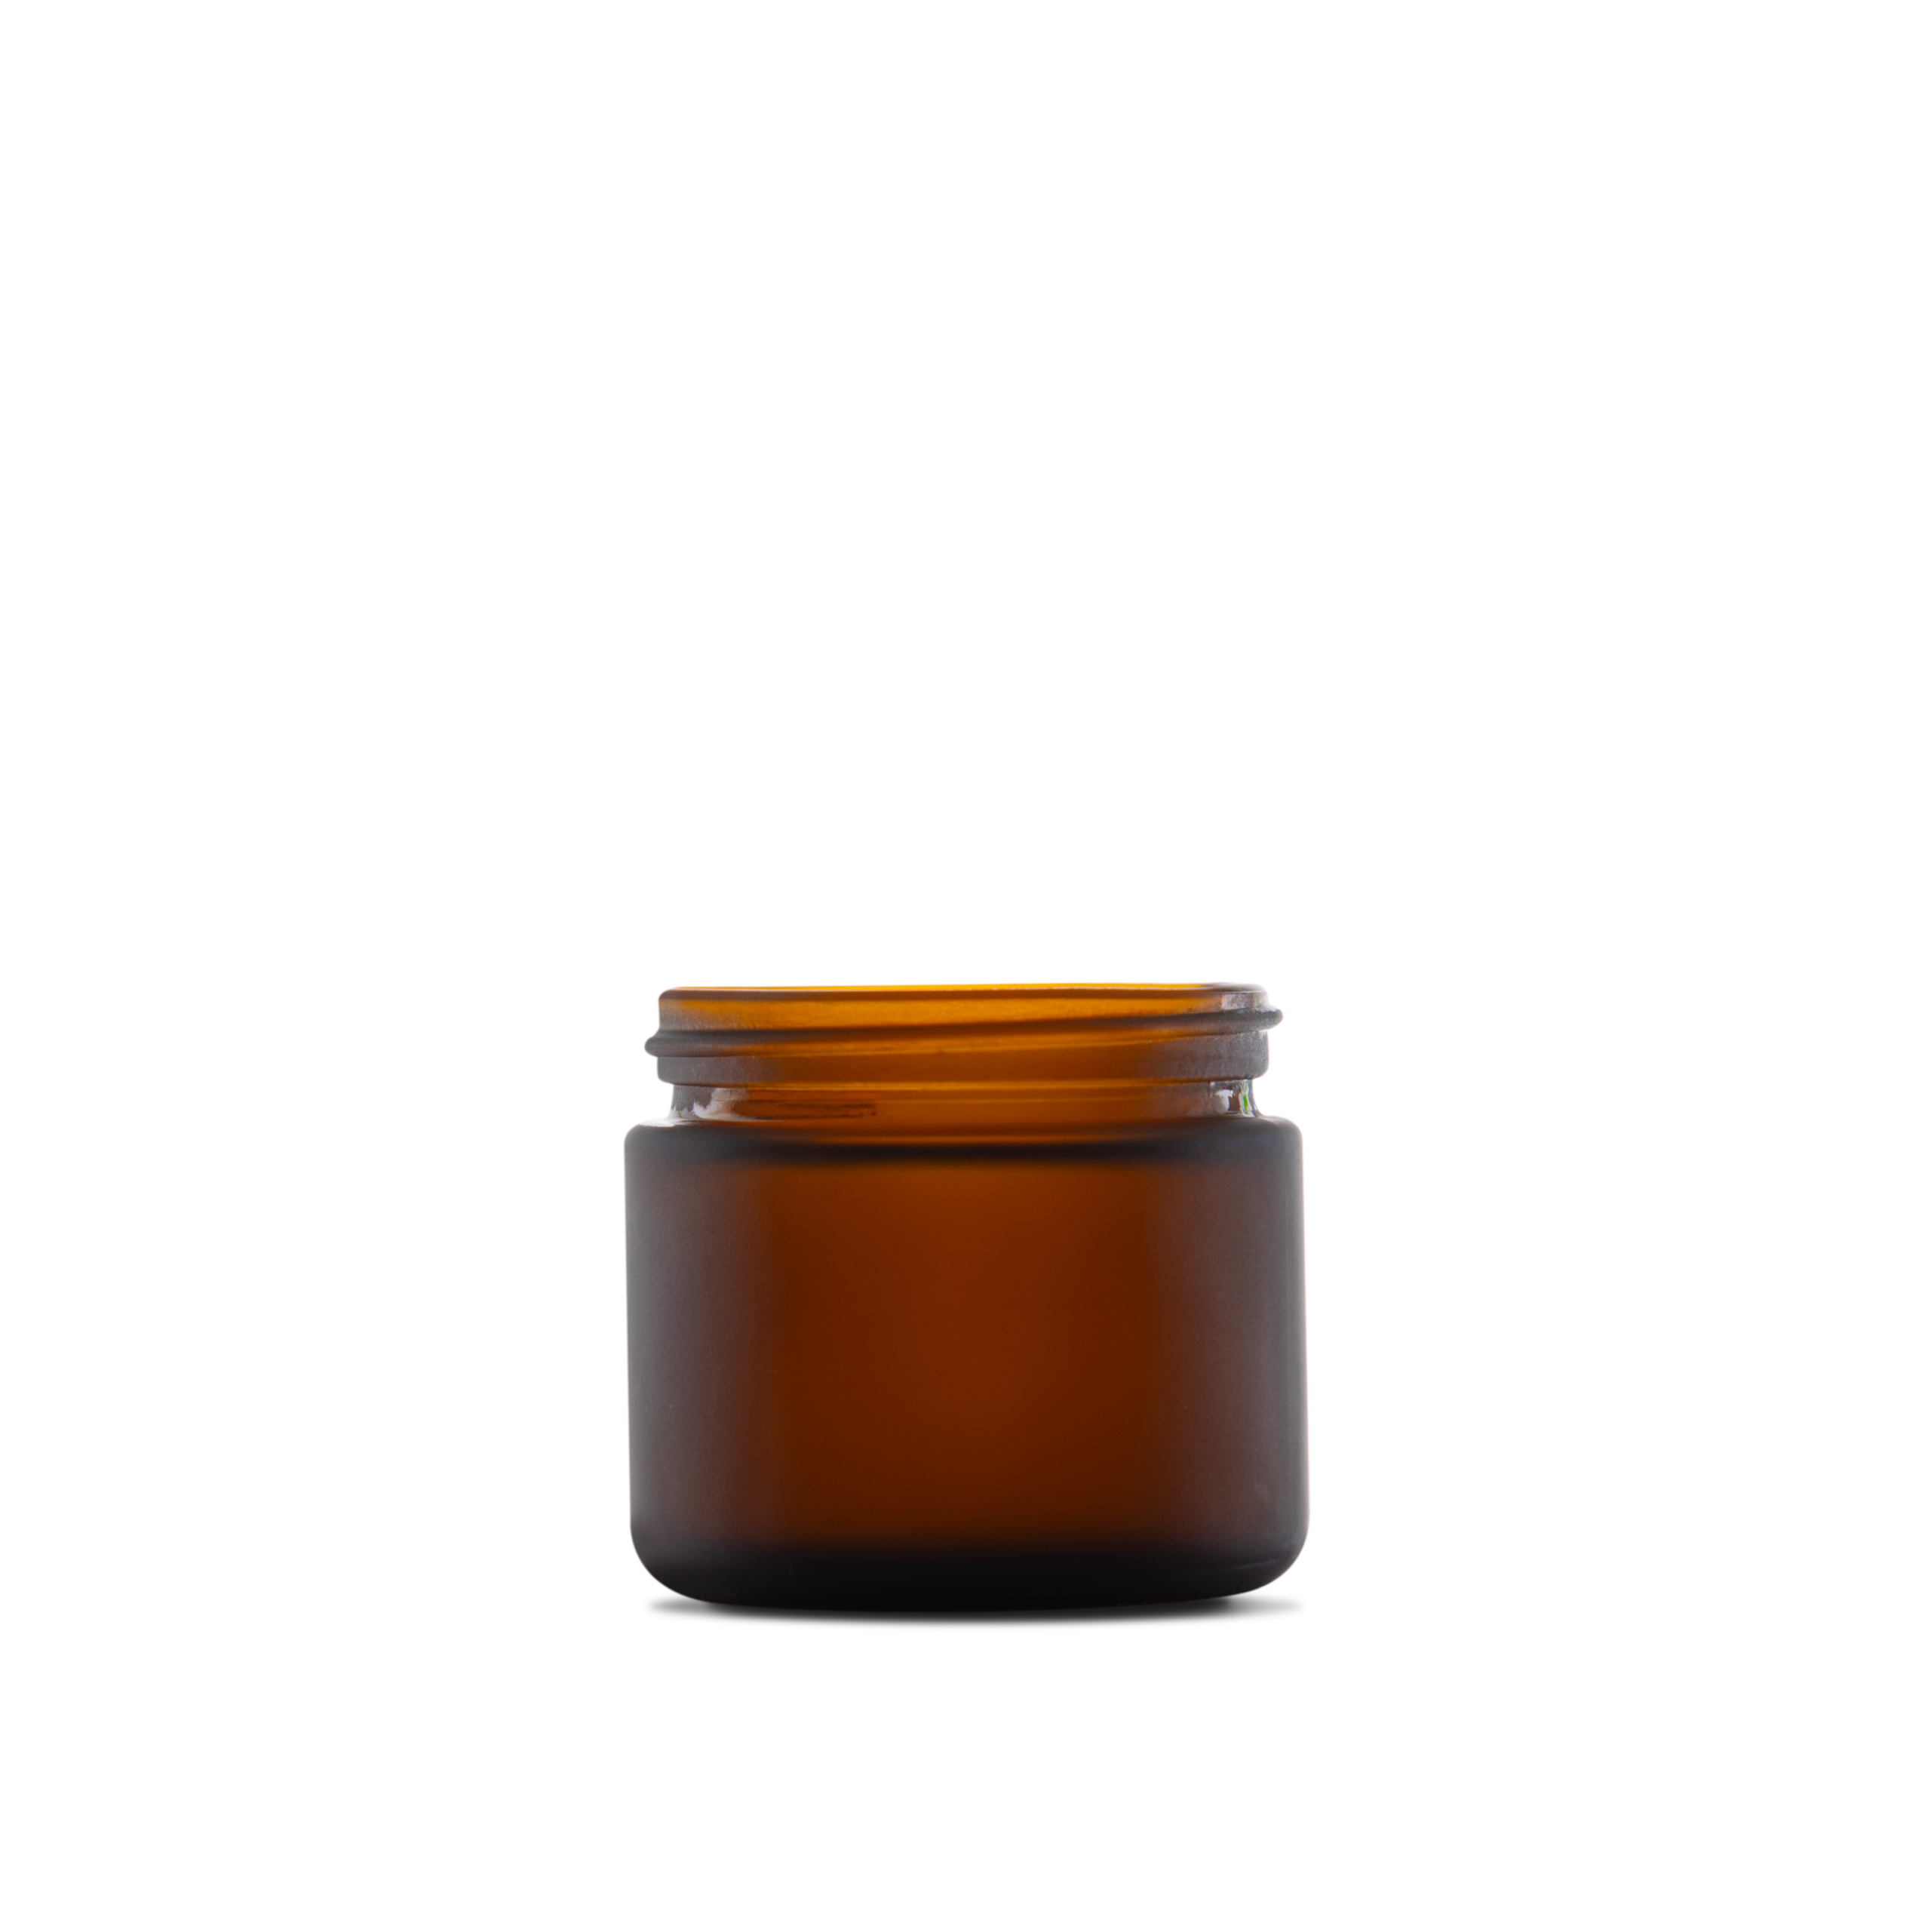 2 oz Amber Frosted Glass Straight-Sided Round Jar 53-400 Neck Finish